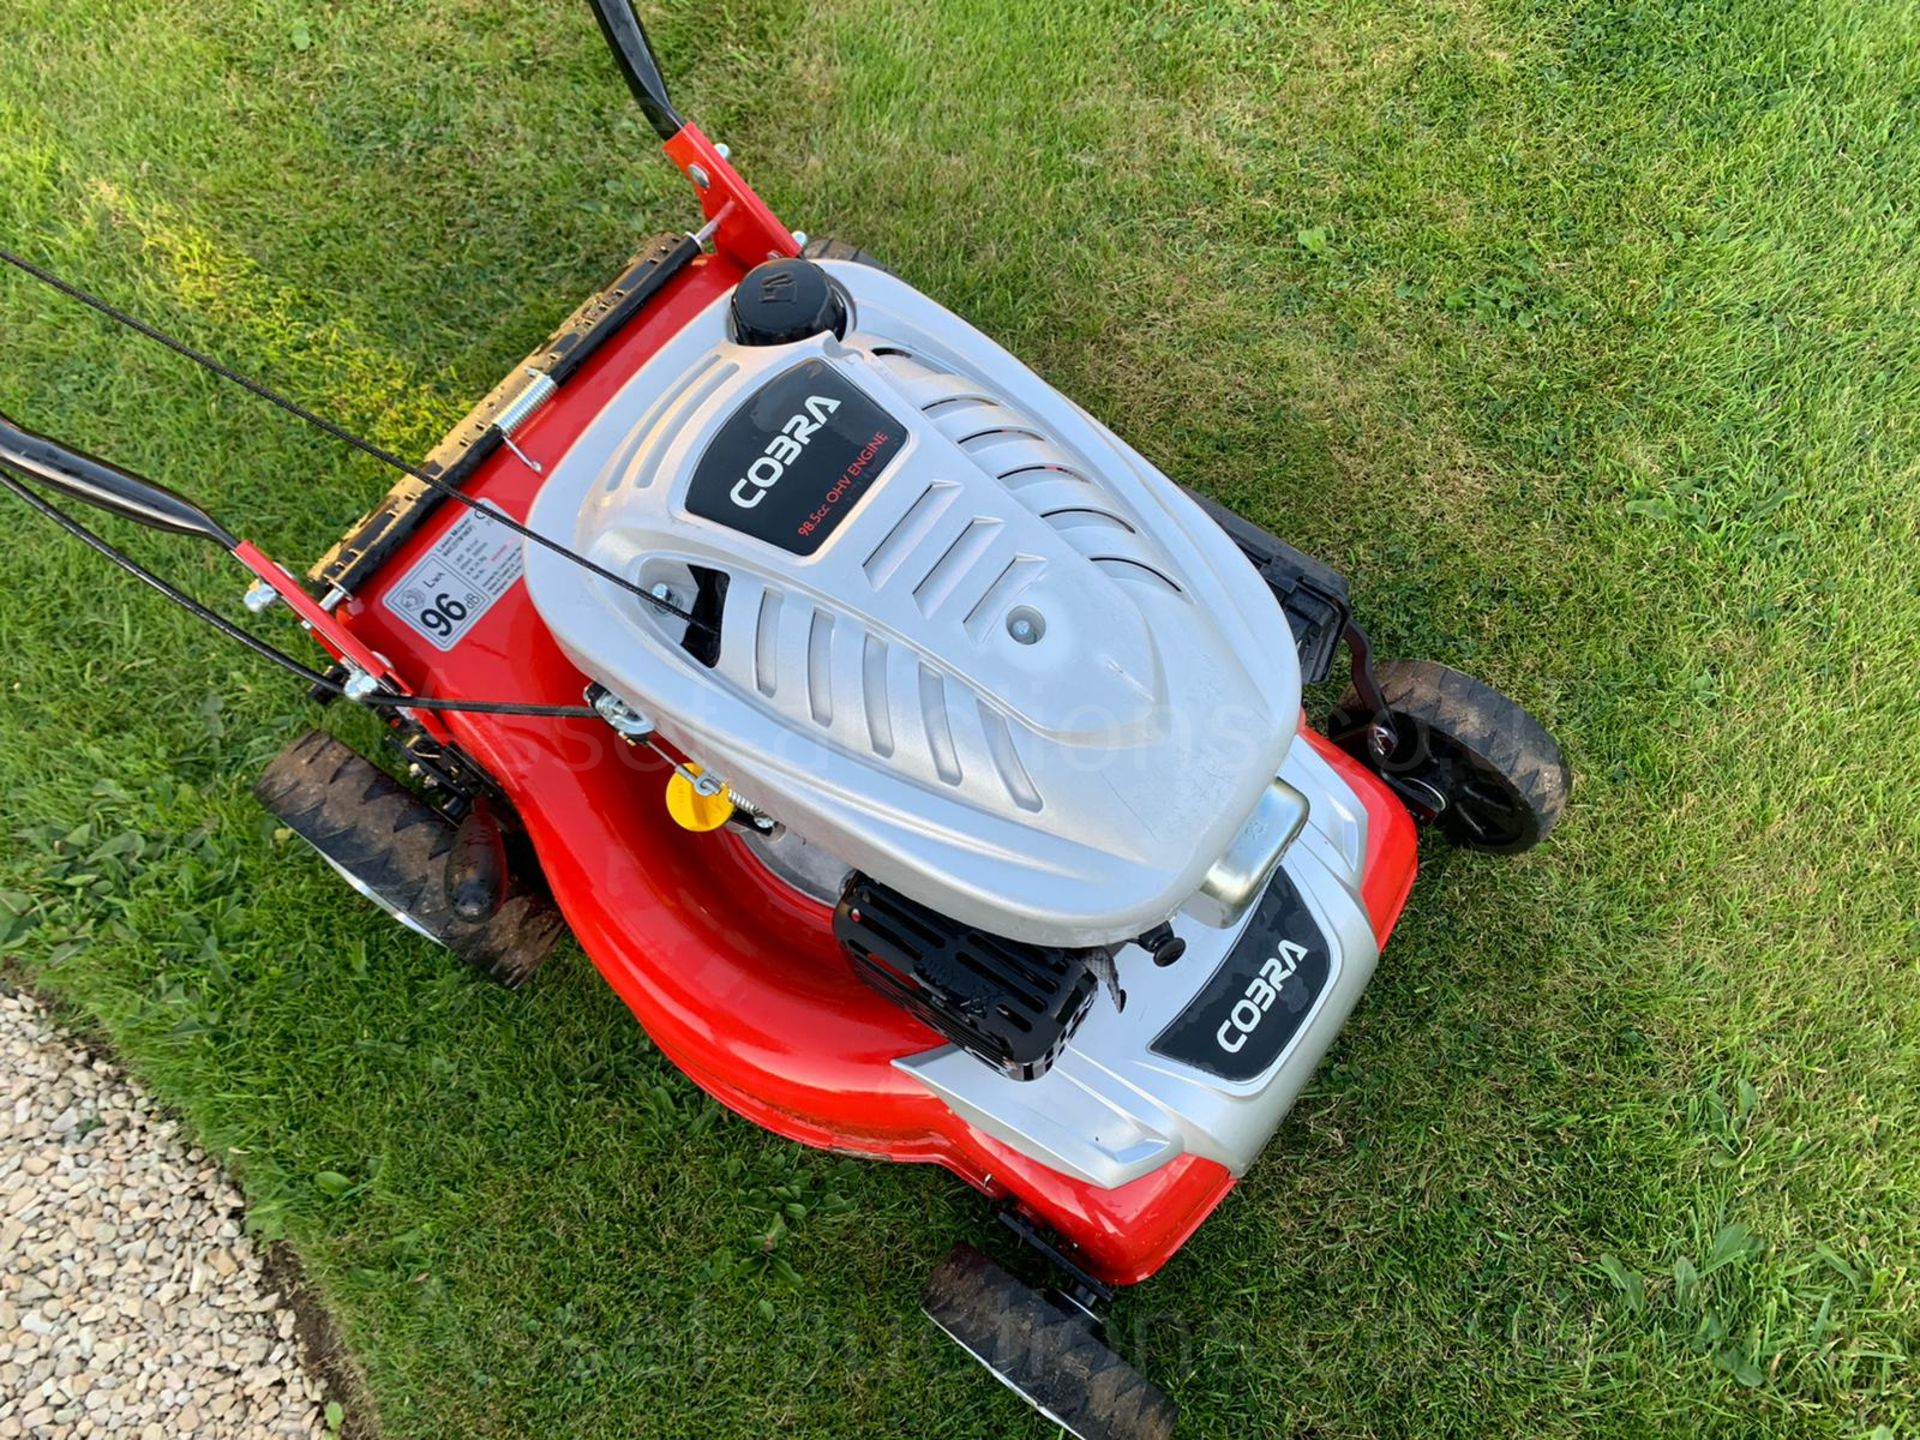 2016 COBRA M40C LAWN MOWER, RUNS AND WORKS WELL, ONLY USED A FEW TIMES, PULL START *NO VAT* - Image 16 of 18